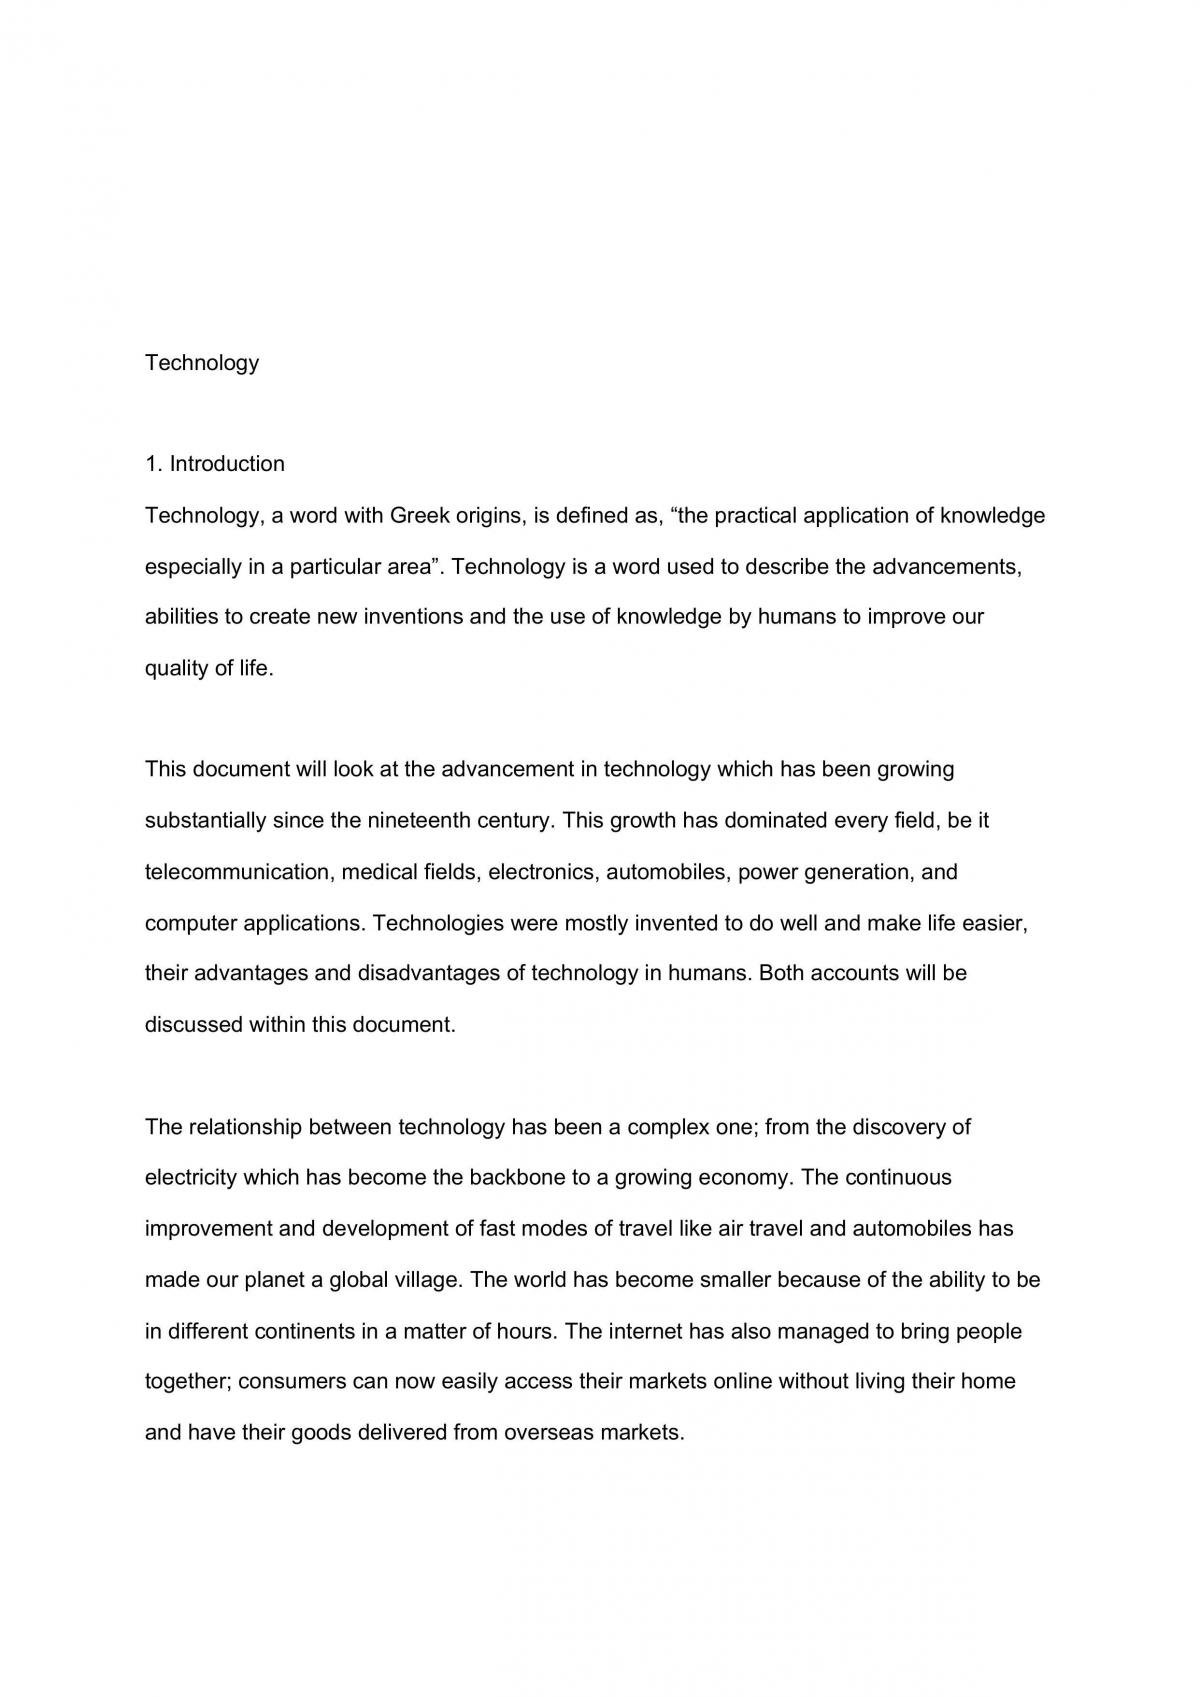 Technology Essay - Page 1